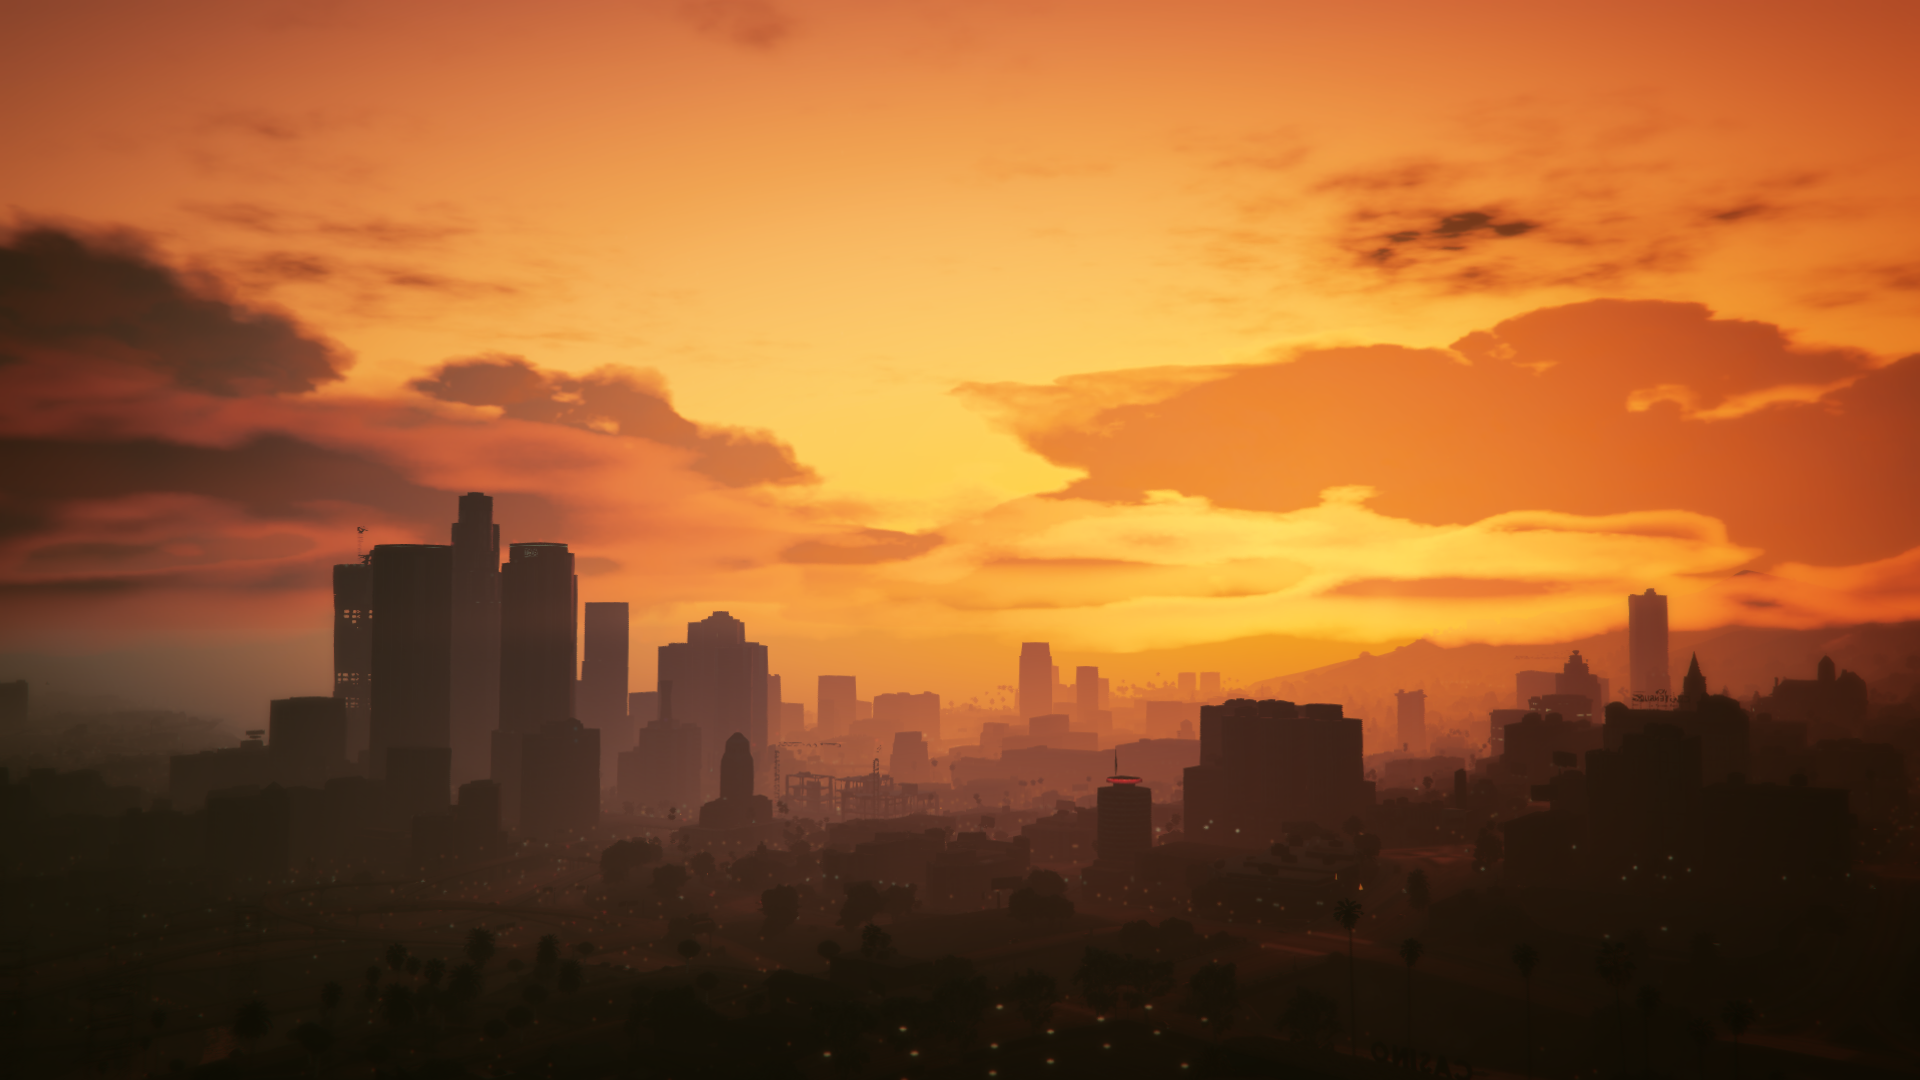 Please Show Your Nicest Sunset Pics. - Page 61 - Gta Online - Gtaforums